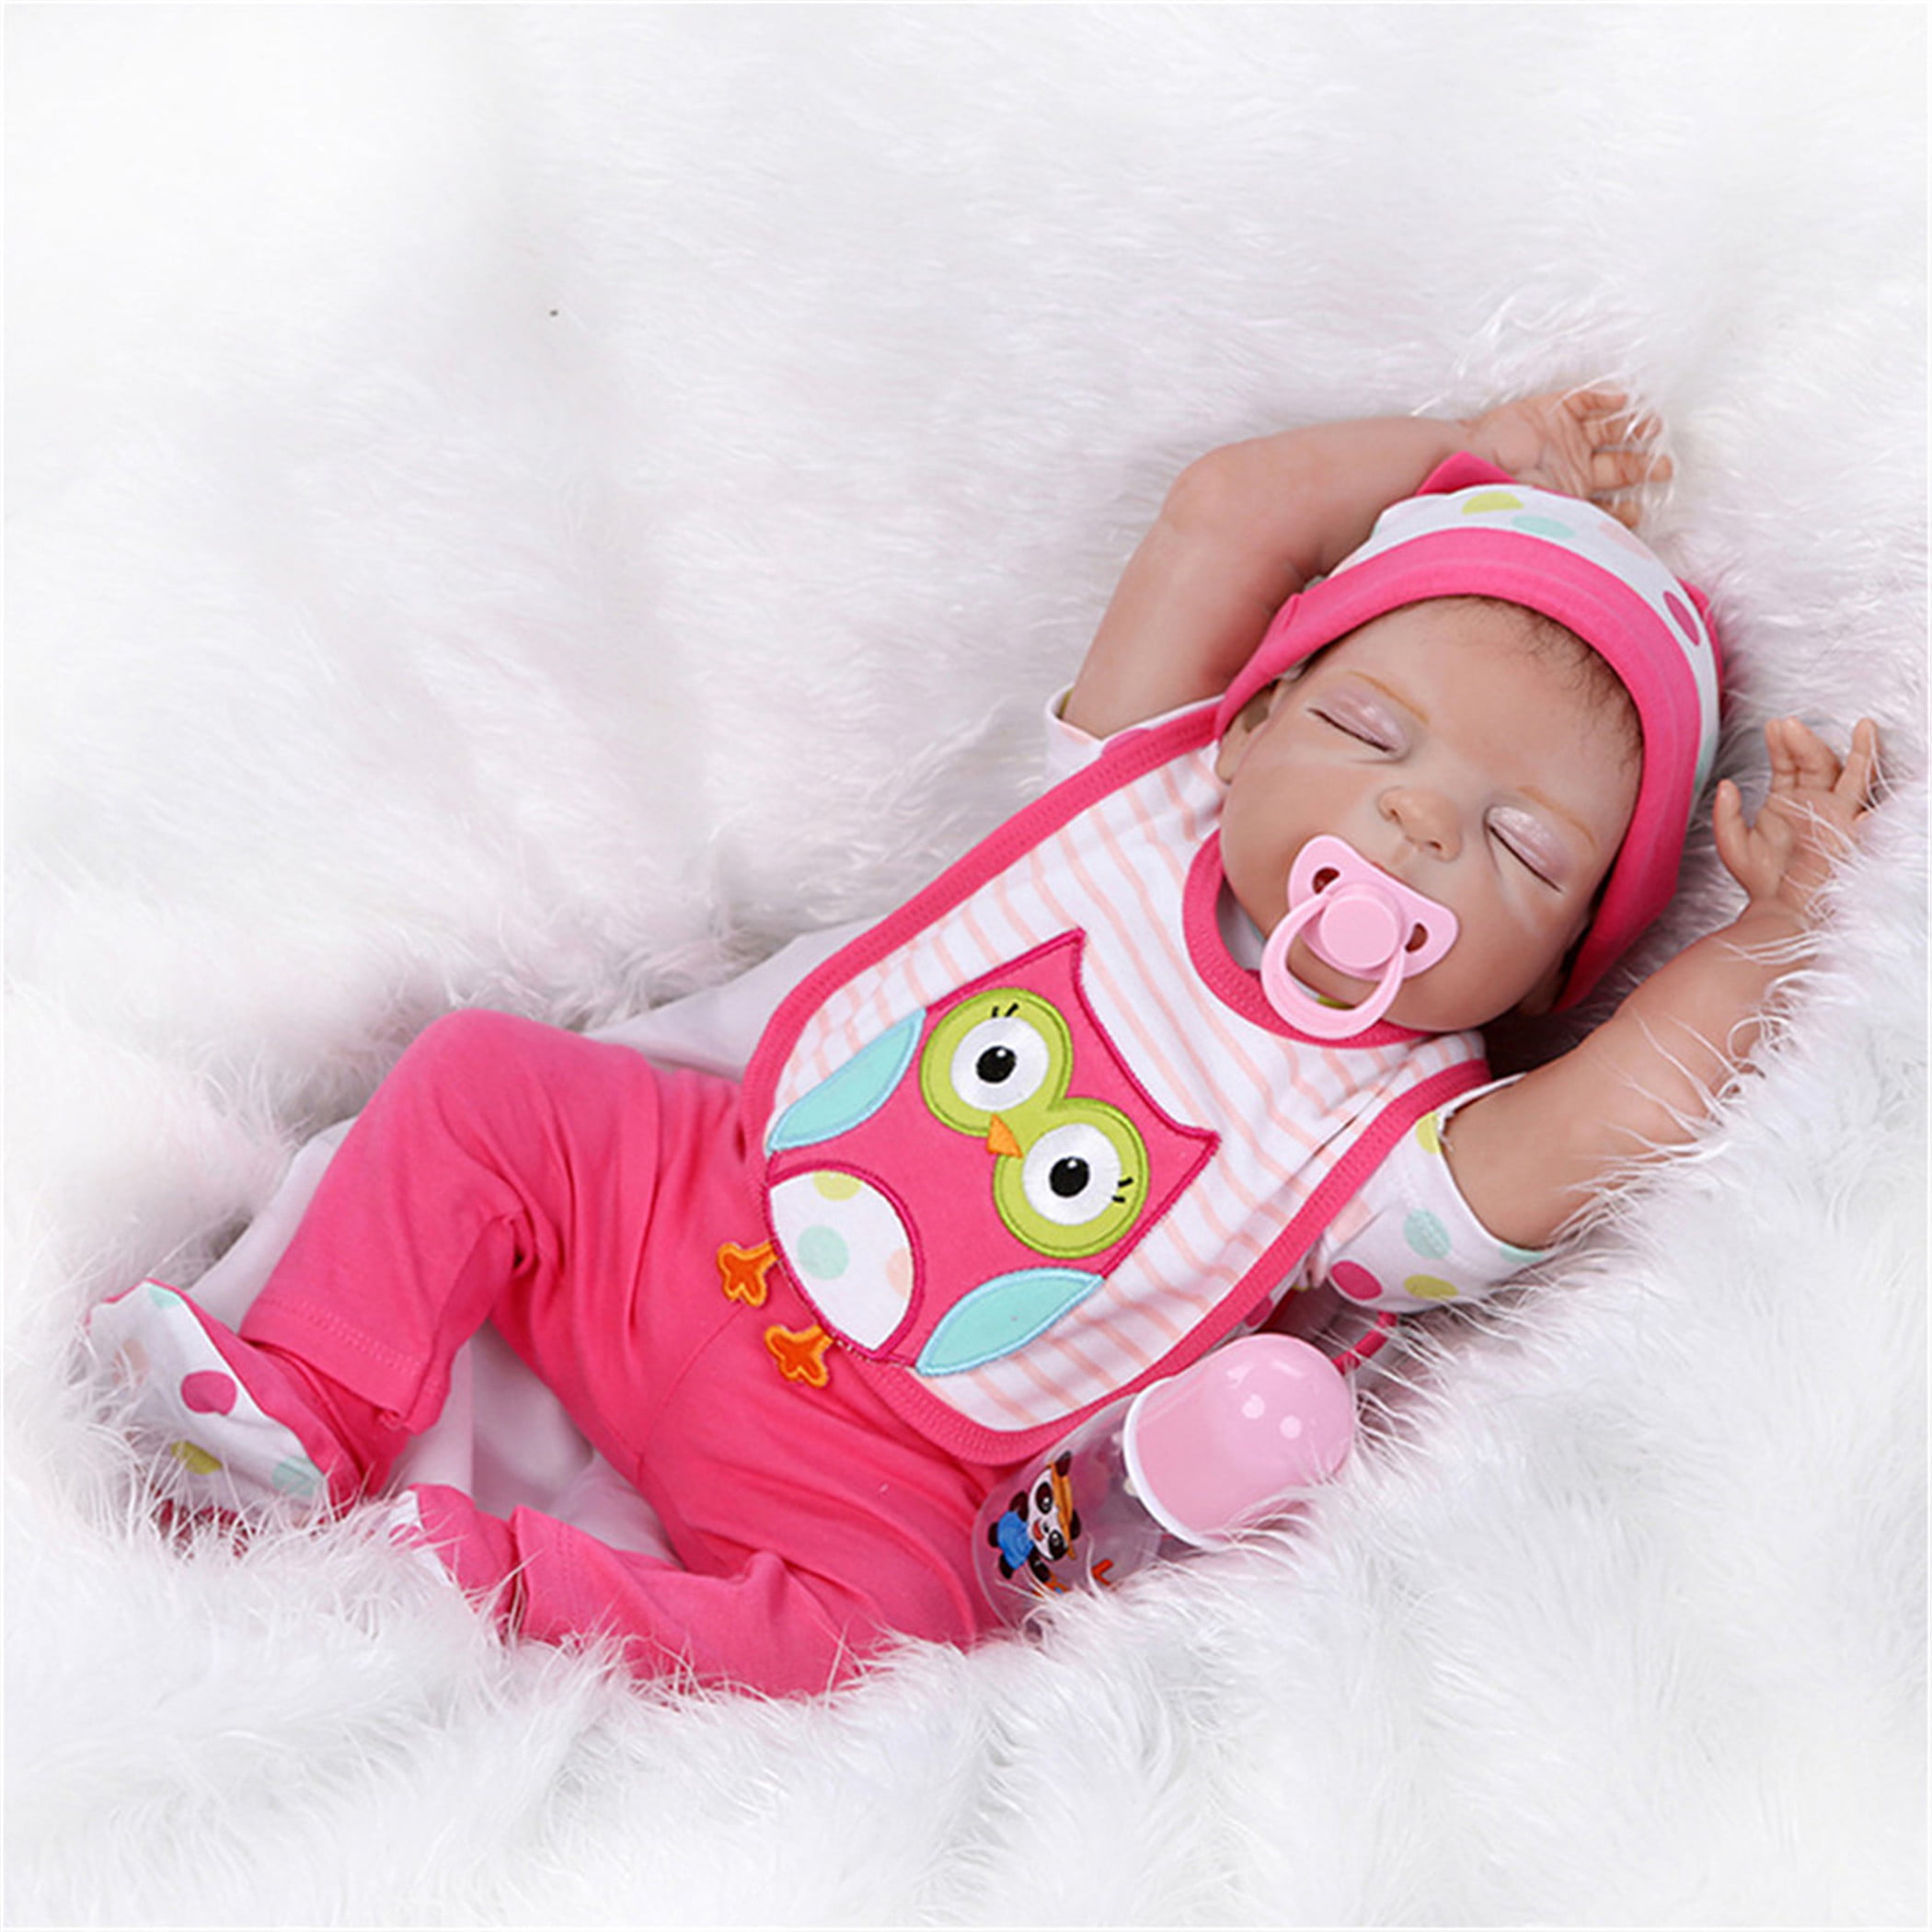 Wholesale Soft Silicone Baby Doll That Look Real 22inch 